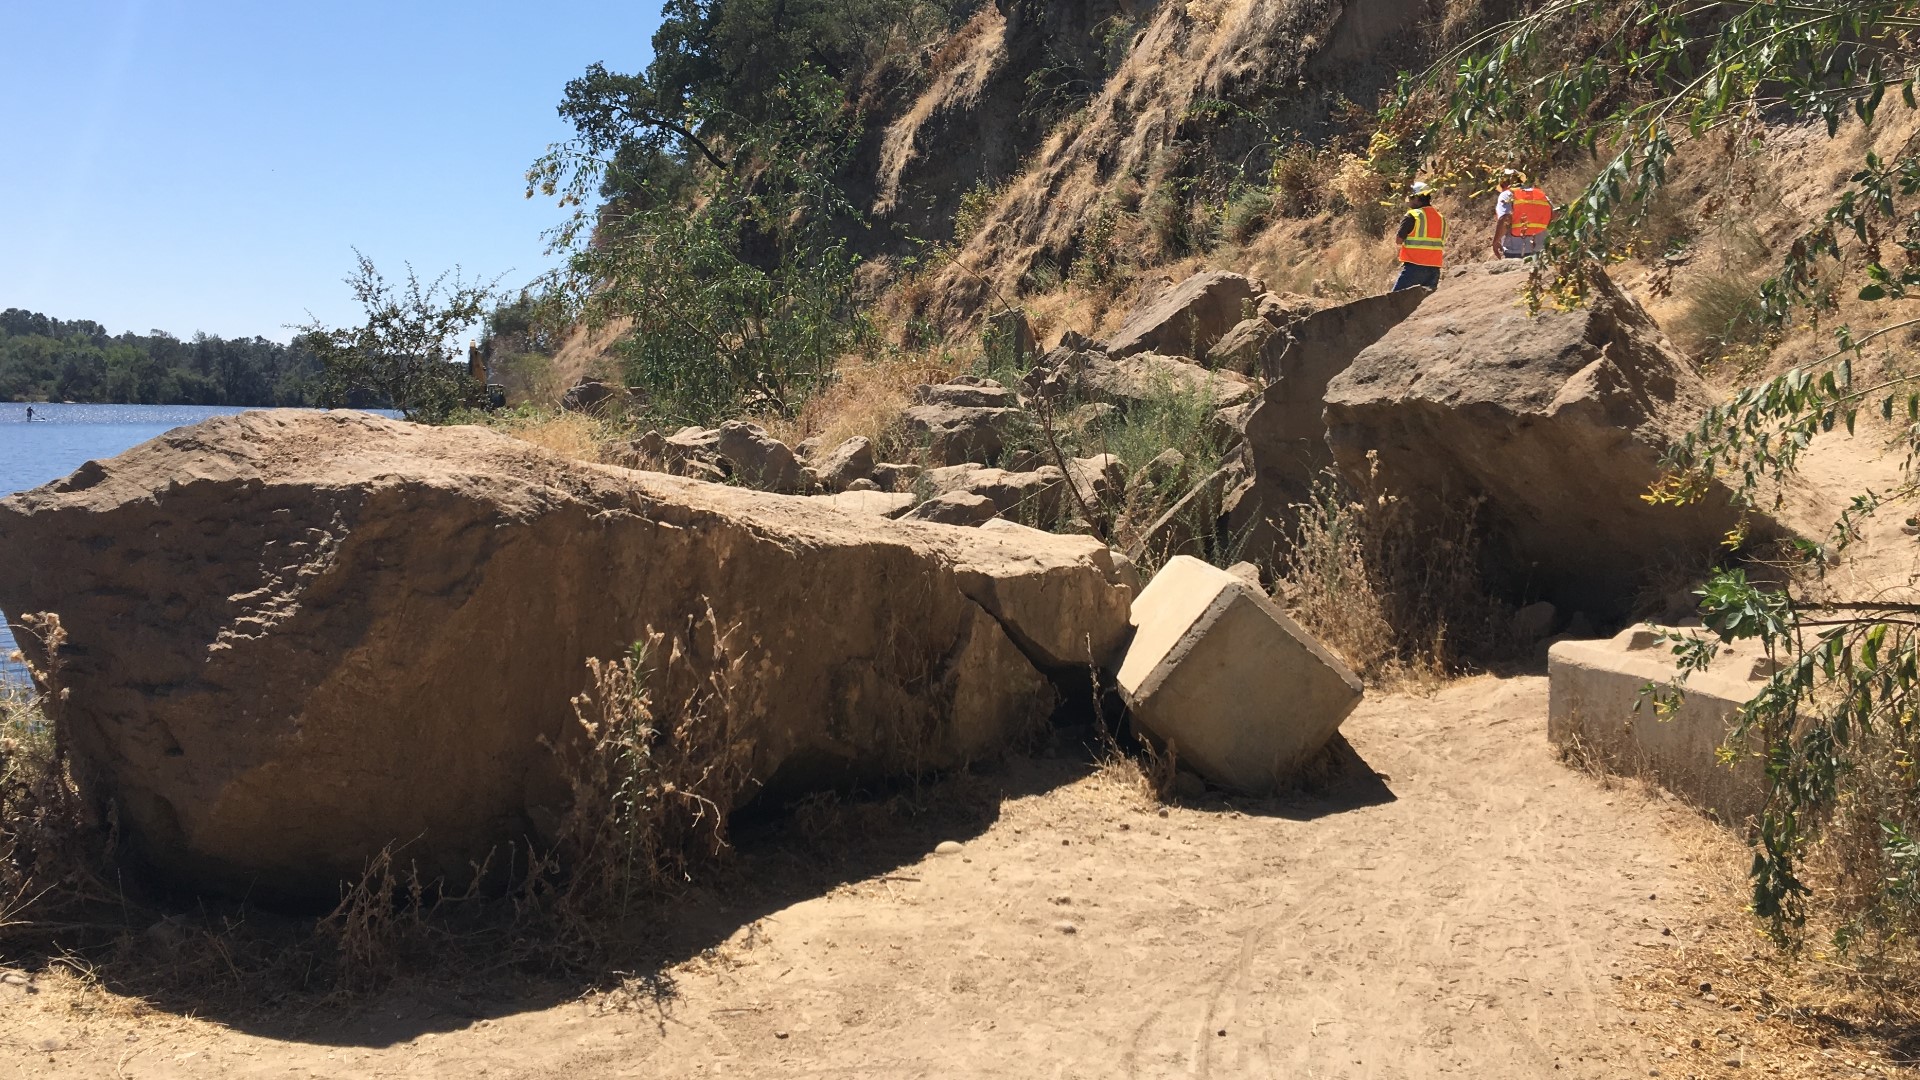 Cyclists and runners who use the American River Bike Trail near Negro Bar State Park got some good news this week. A portion of the trail that was off-limits due to a rock slide is getting cleared and re-opened after nearly three years!